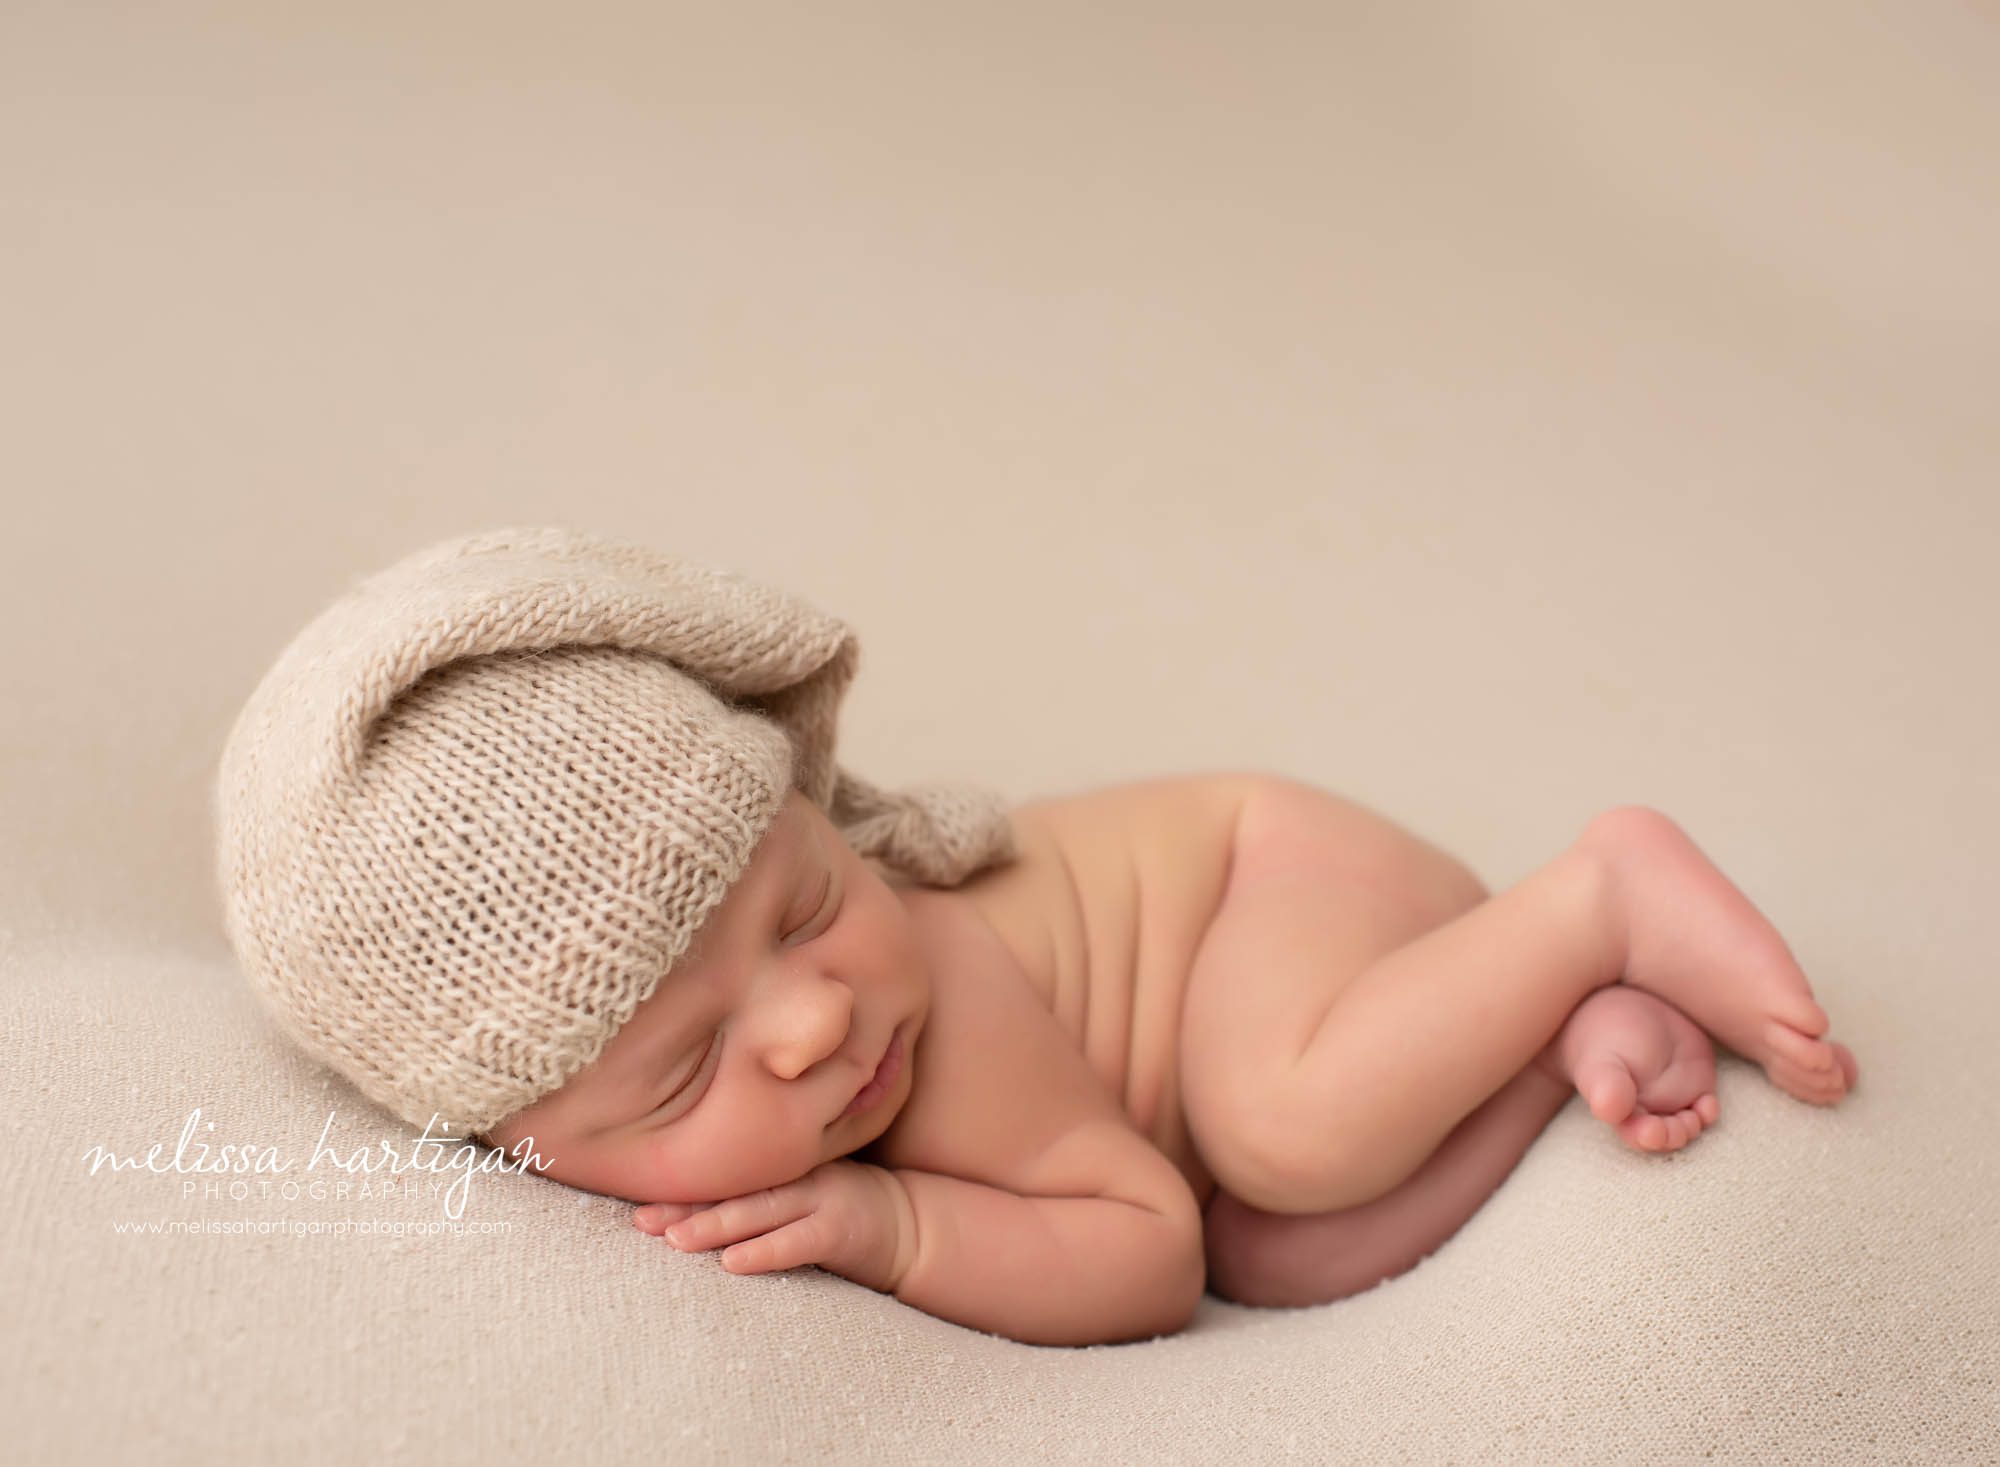 Baby boy posed side laying on tan colored blanket backdrop with knitted tan sleepy cap